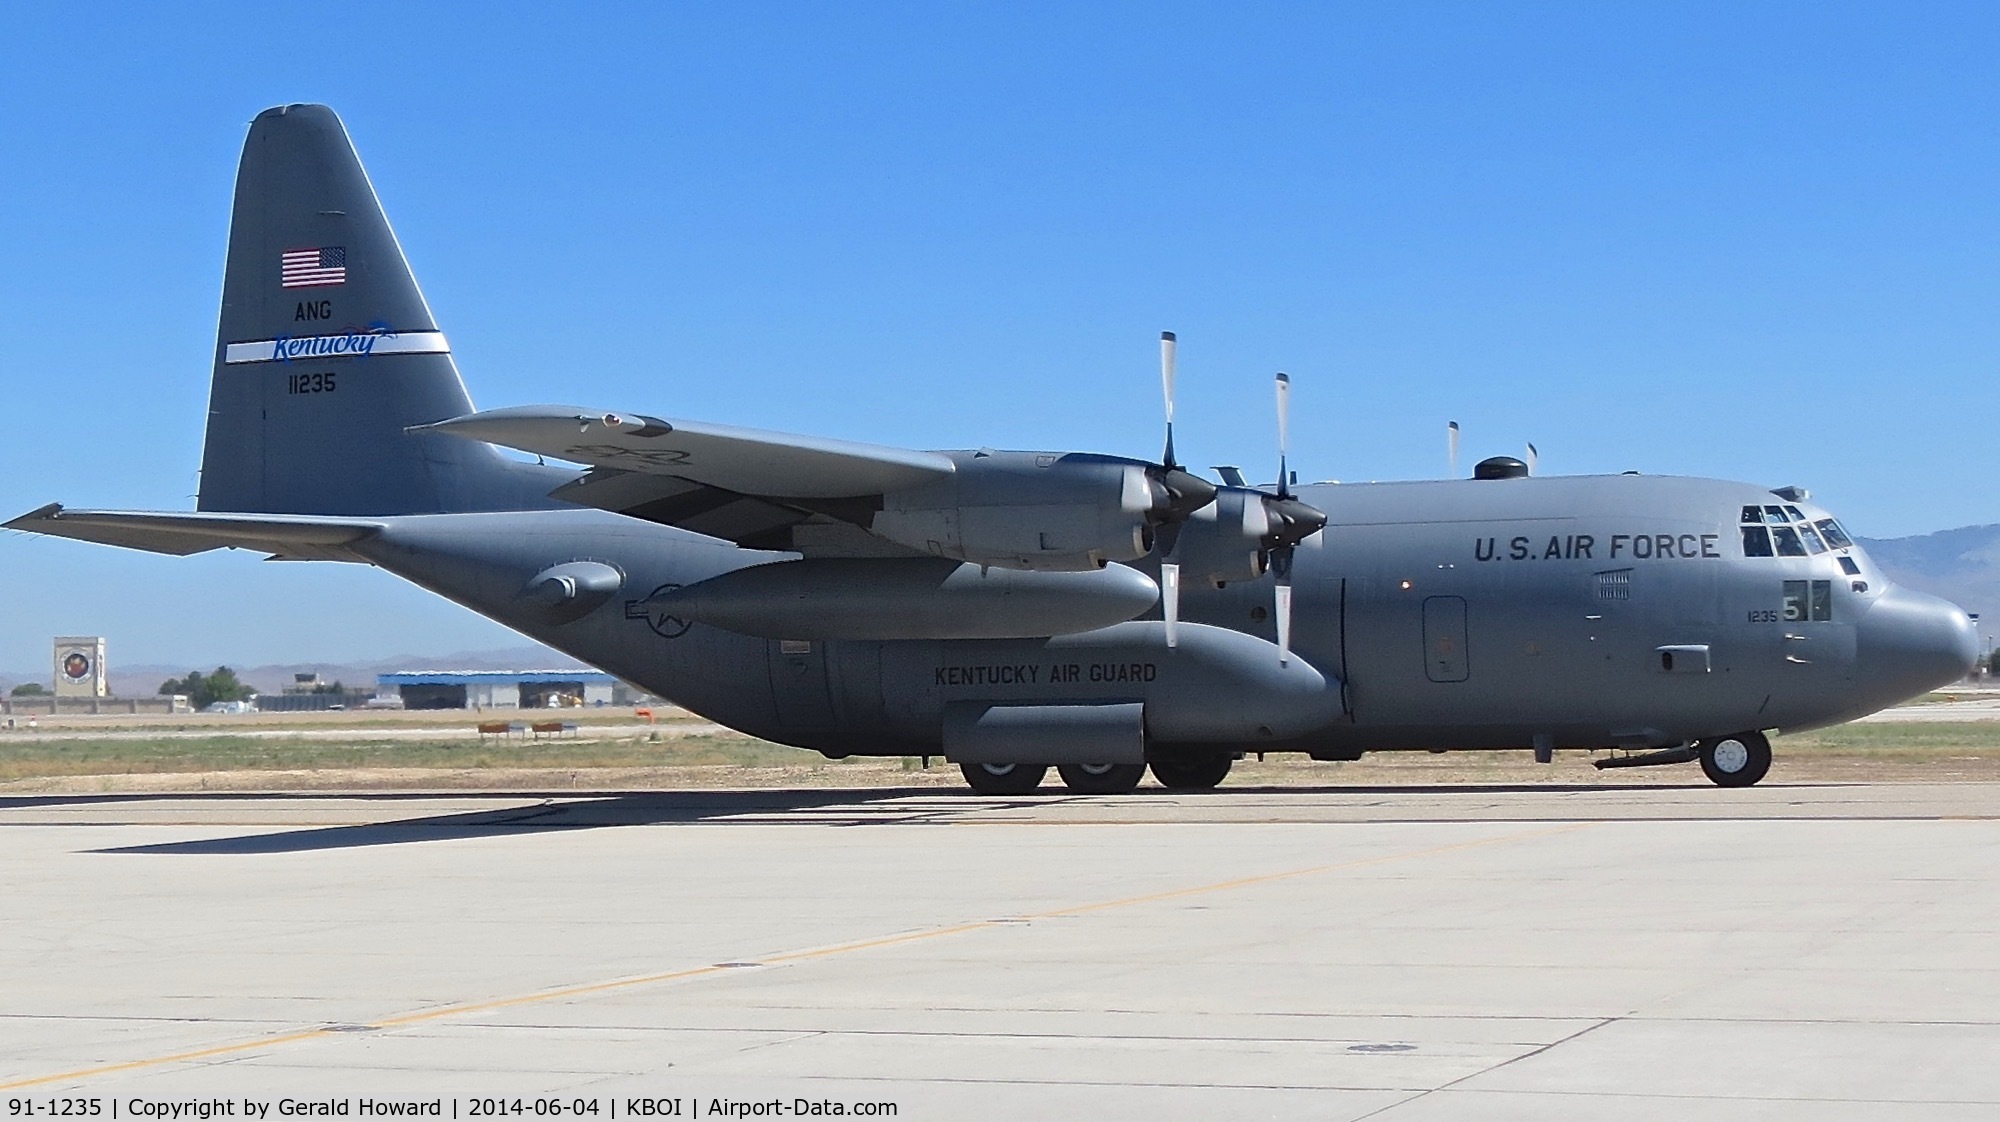 91-1235, 1991 Lockheed C-130H Hercules C/N 382-5285, Taxiing on Bravo for RWY 28L. 123rd Airlift Wing, Kentucky ANG.